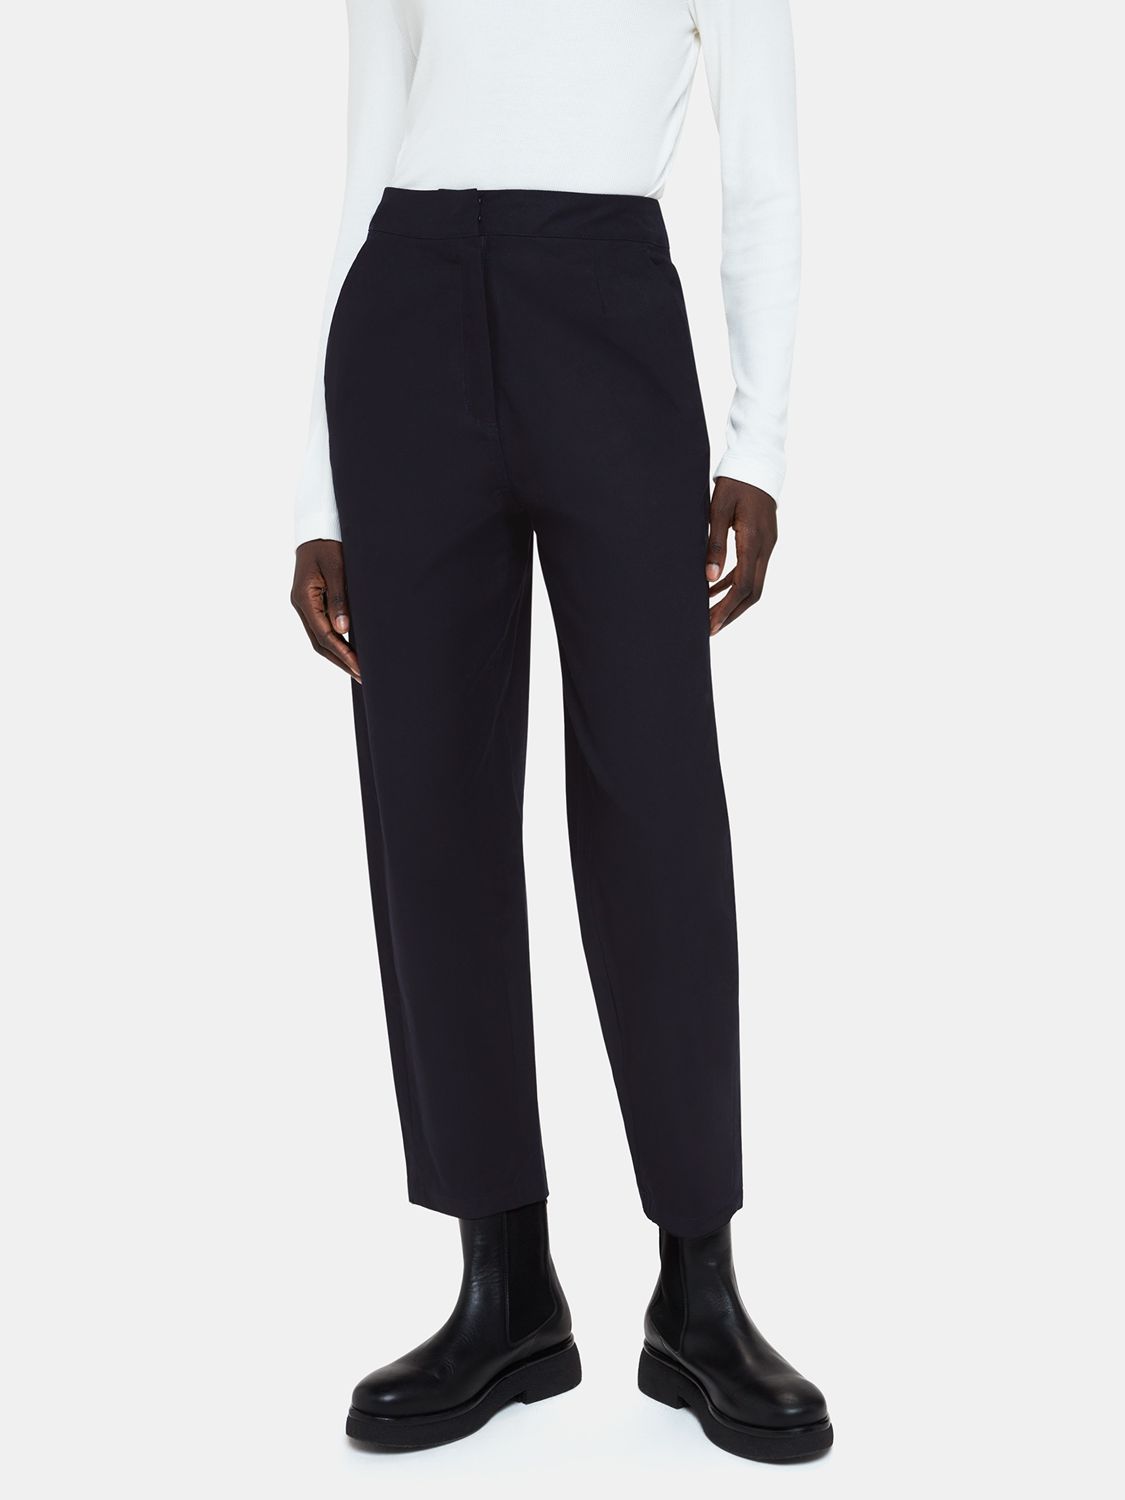 Whistles Carla Barrel Cotton Trousers, Navy at John Lewis & Partners